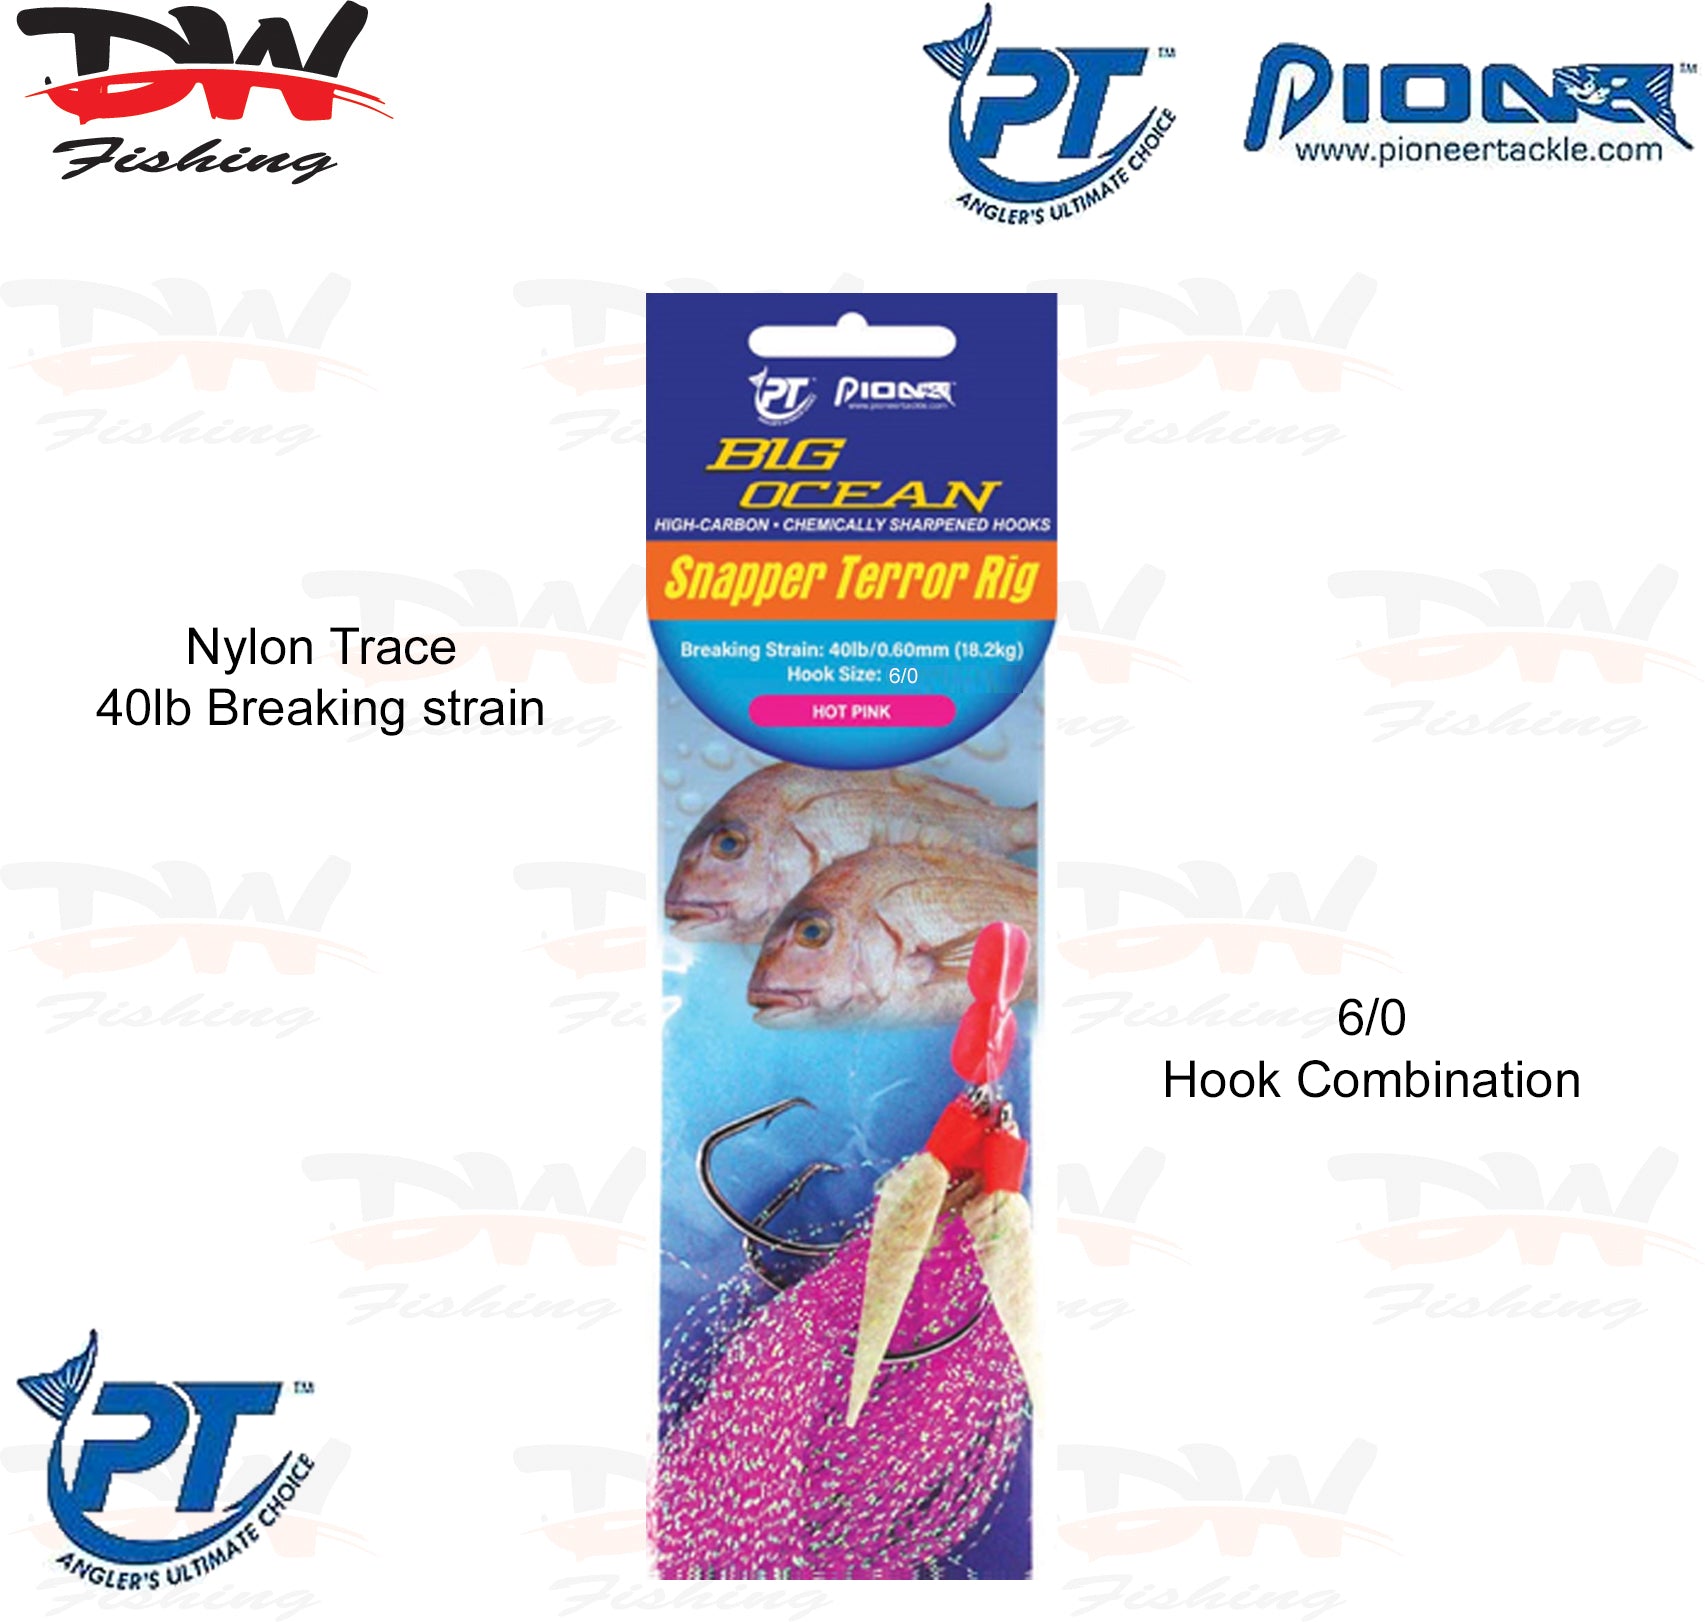 Snapper snatcher by Pioneer Tackle Big Ocean snapper terror rig Hot Pink colour with size 6/0 hooks